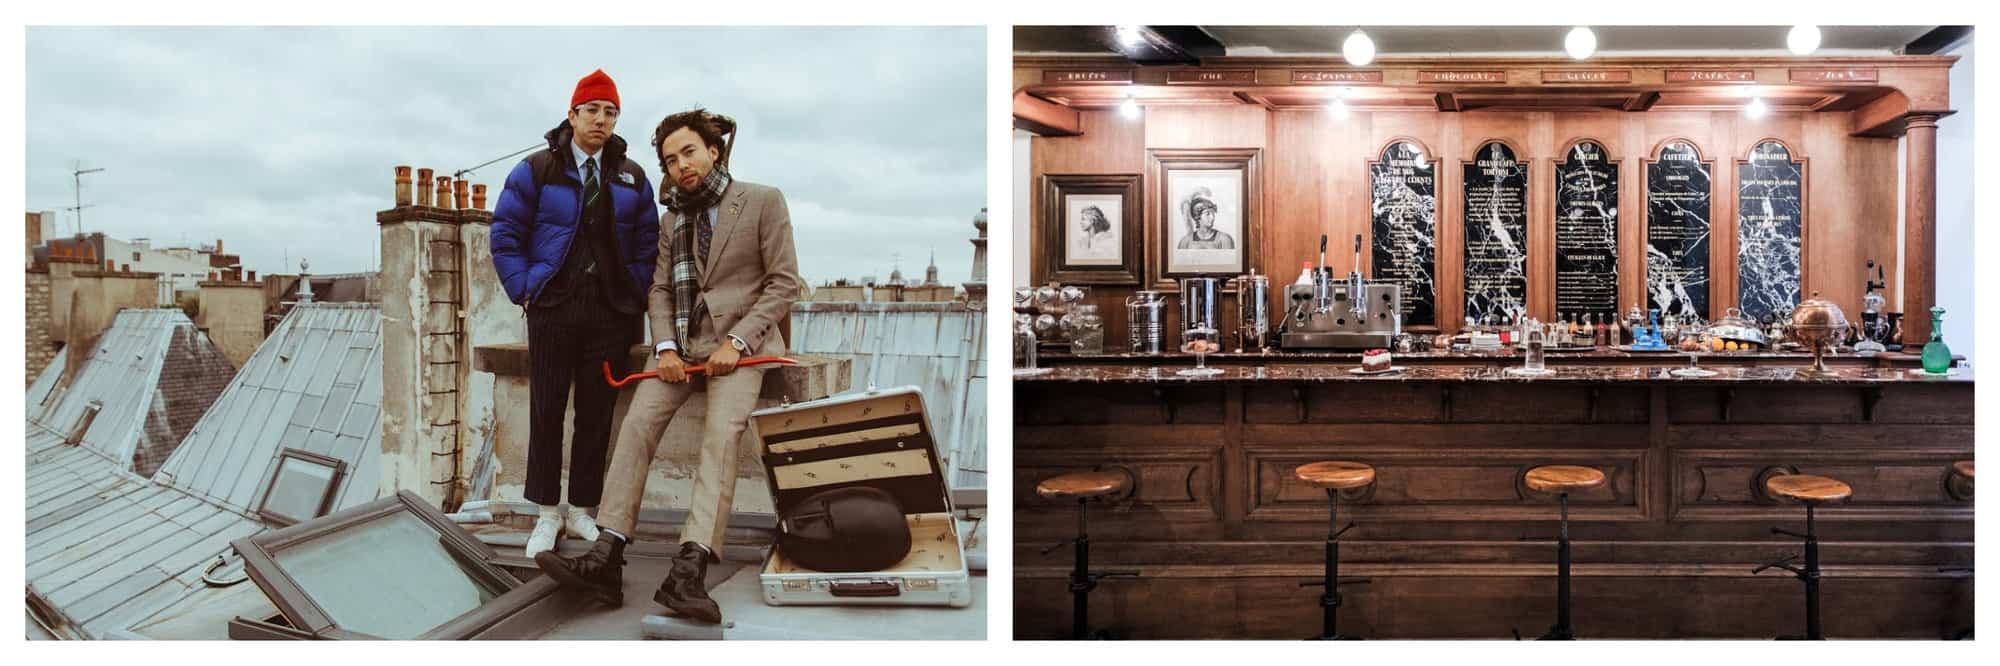 Left: A photo from Serpent à Plume, an urbane lounge with unique, cavelike architecture, that is located 2 mins away from Place des Vosges. In this picture, two well-dressed gentlemen are standing on a Parisian rooftop with a luggage and some accessories. Right: A photo taken from L'Officine Universelle Bully, a perfume store in Paris since 1803. This photo shows one of its beautiful stores in Le Haut Marais that is designed to look like a Speakeasy bar complete with drinks and spirits in wooden furnishings.